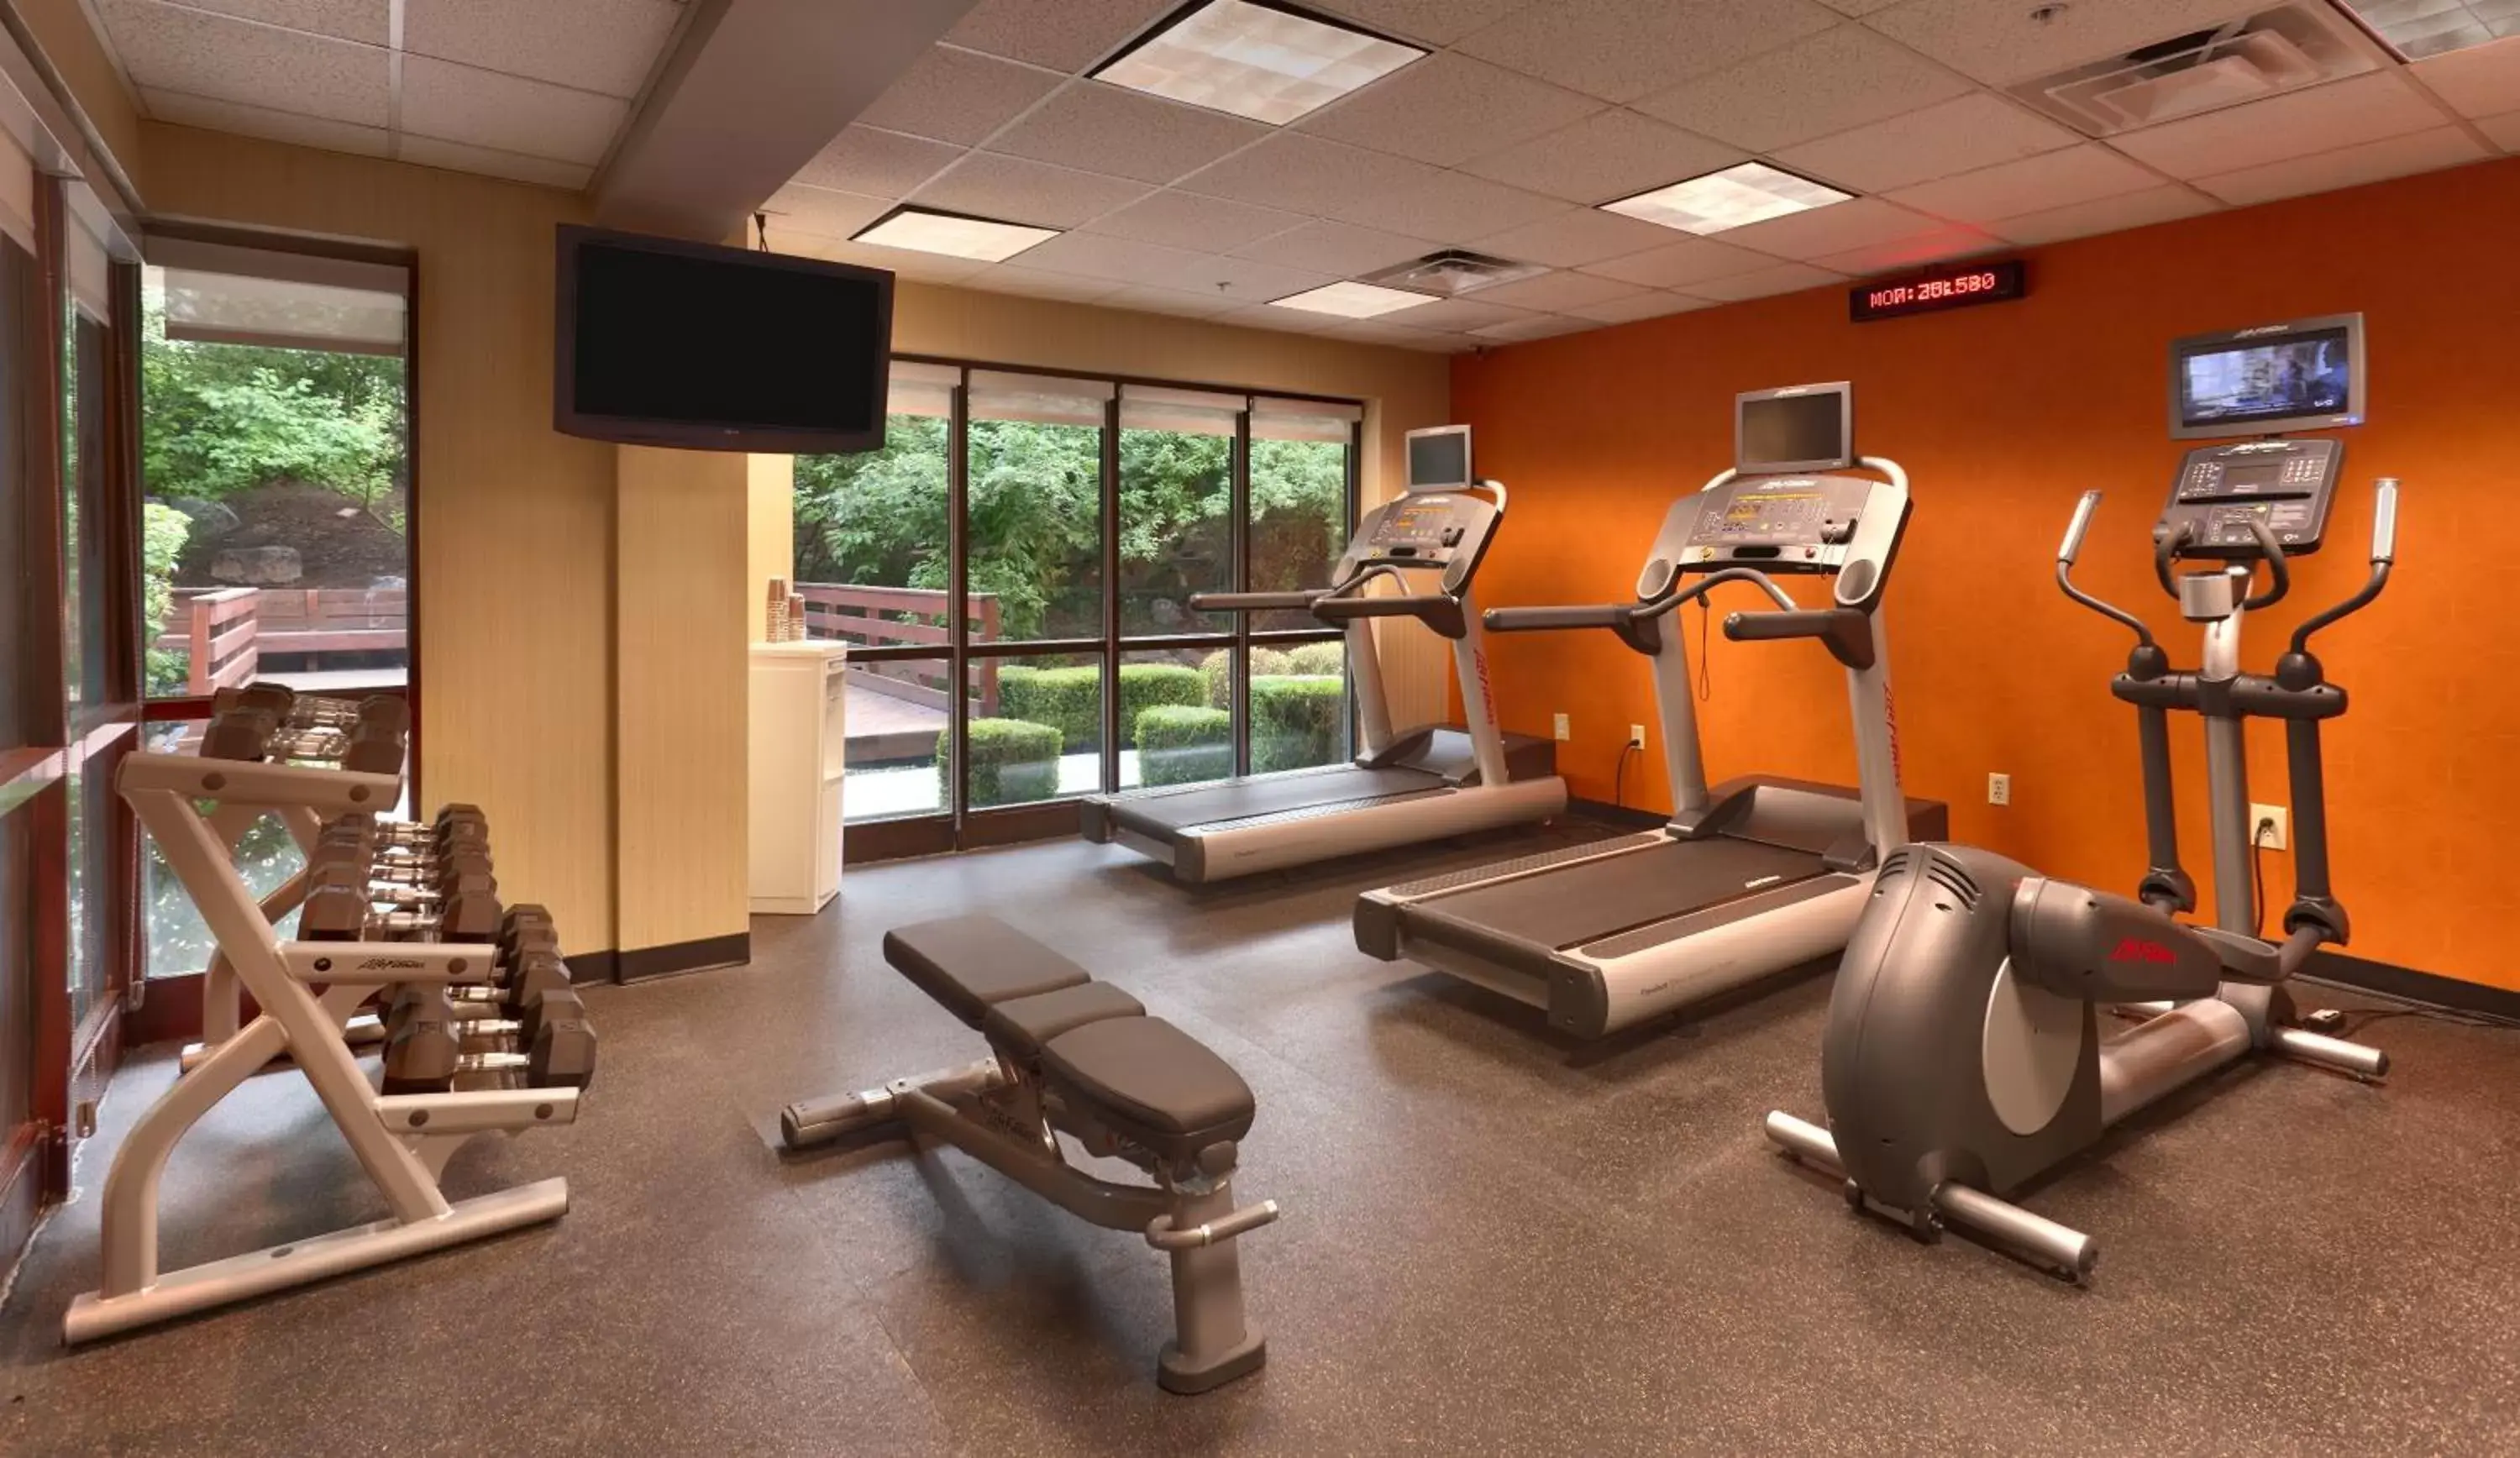 Fitness centre/facilities, Fitness Center/Facilities in Best Western Plus Provo University Inn